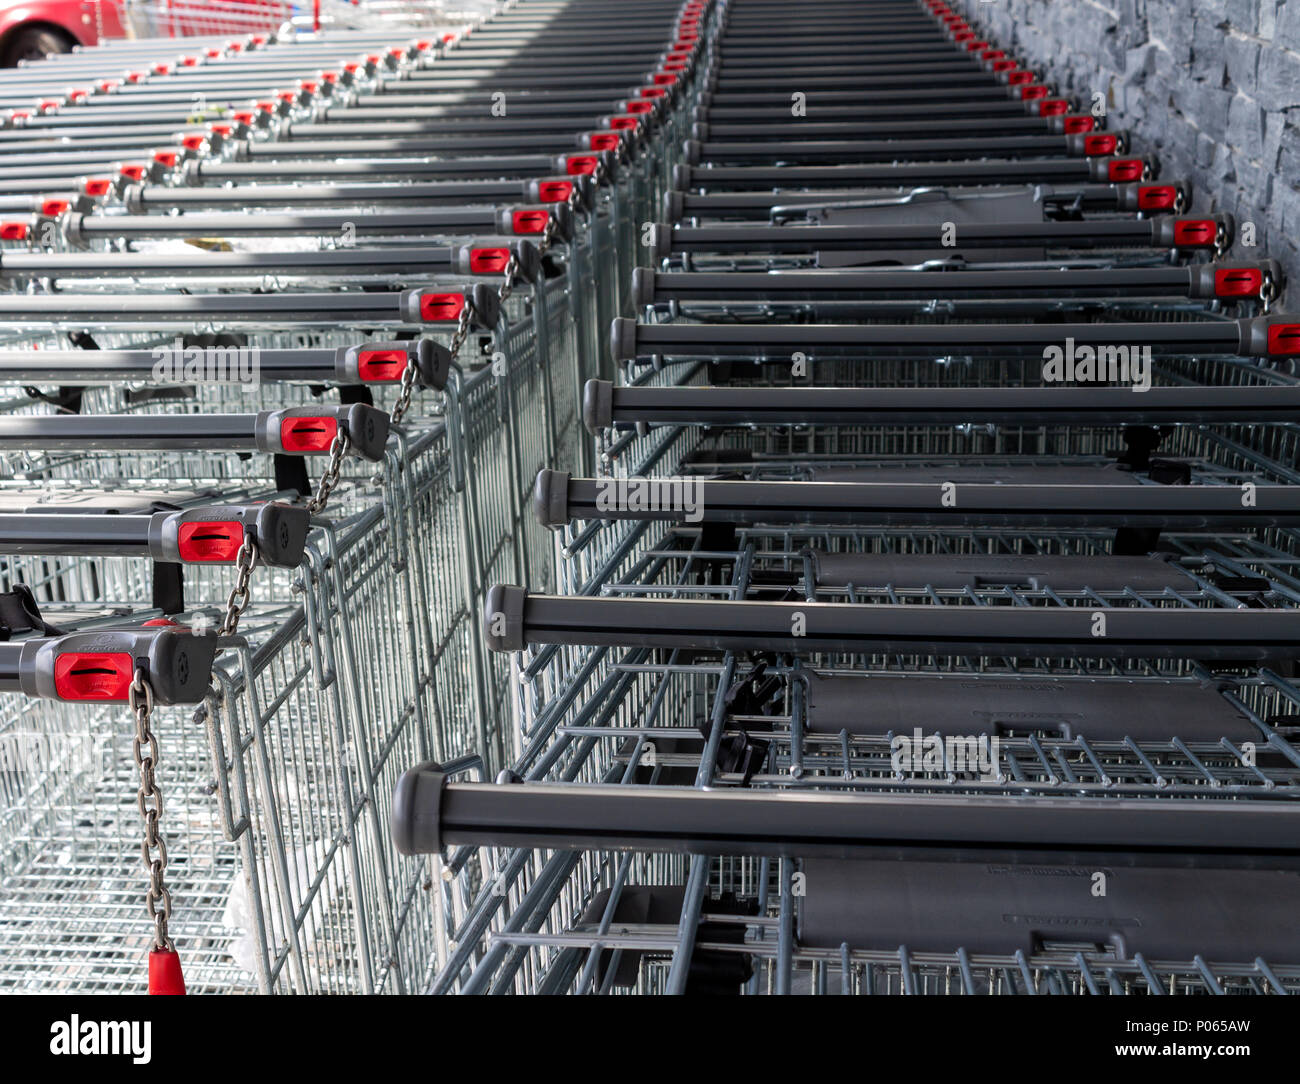 shopping trolleys, coin operated stacked outside a supermarket or food retail outlet. Stock Photo